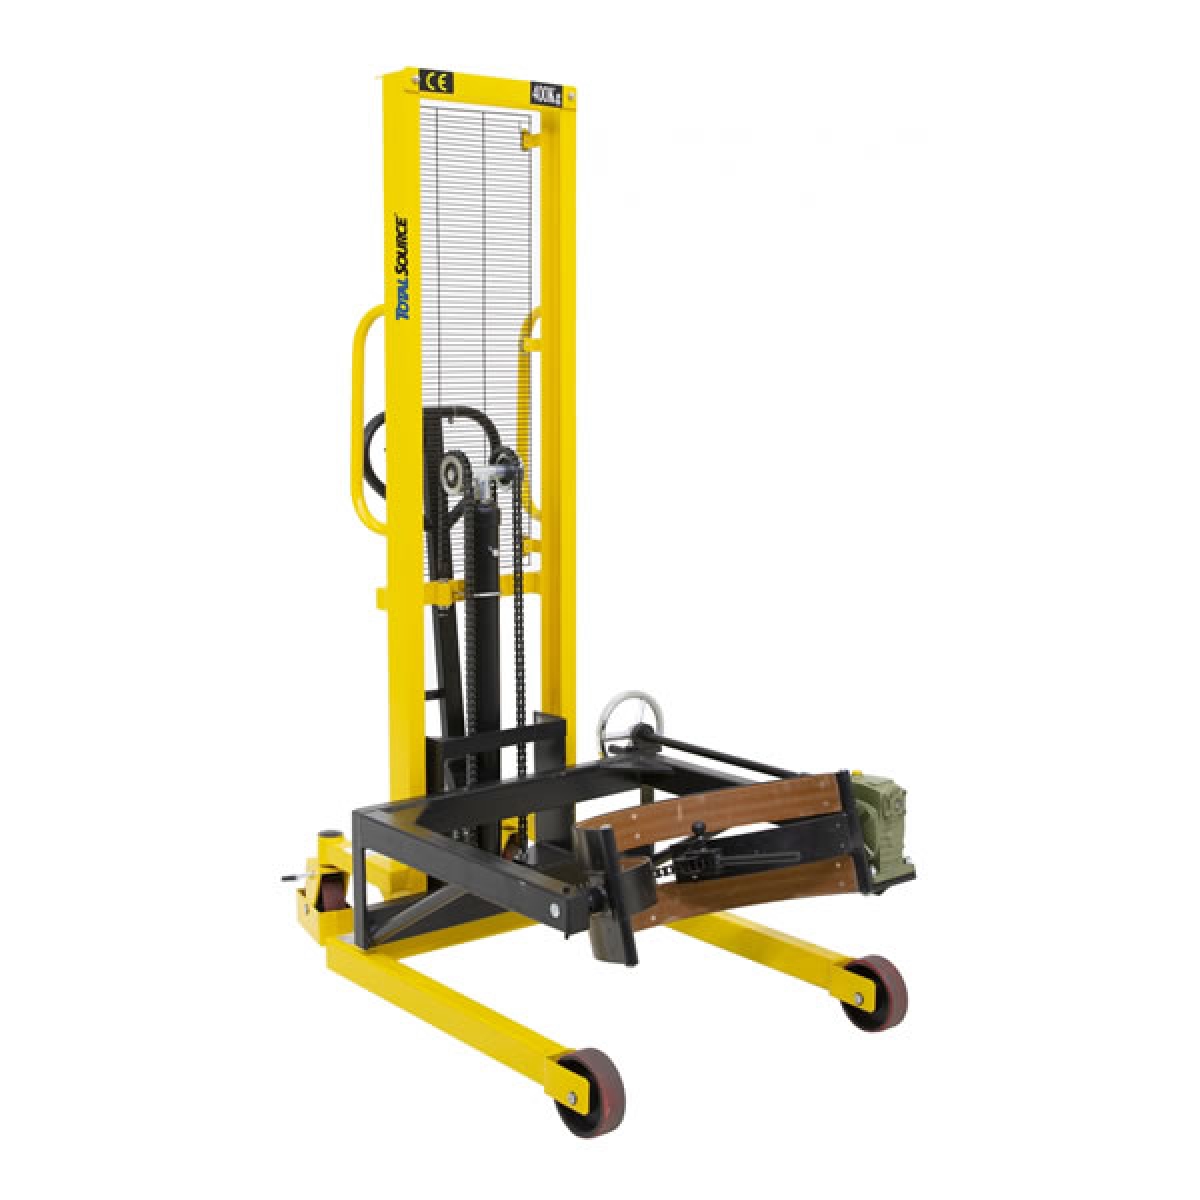 400kg Capacity-1350mm Lift Height